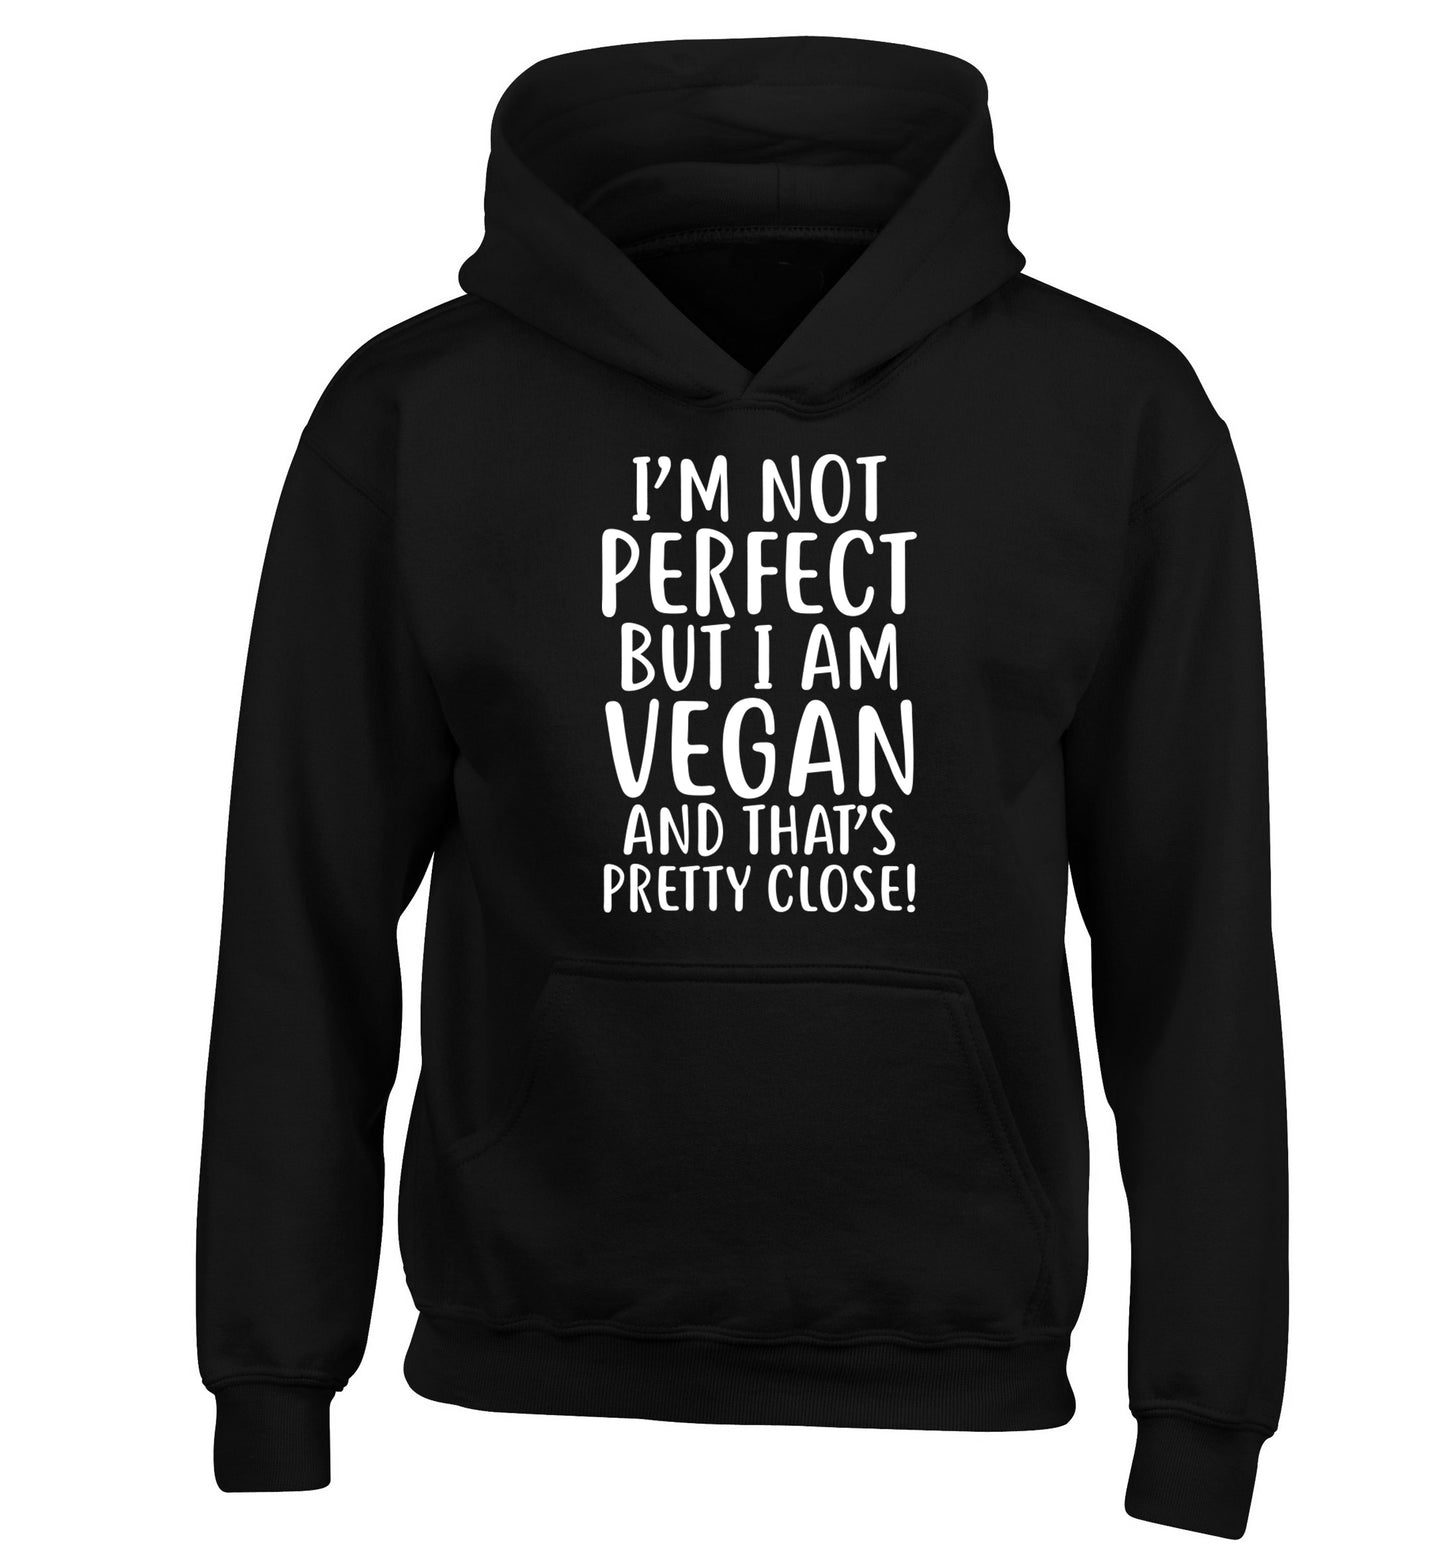 Might not be perfect but I am vegan children's black hoodie 12-13 Years